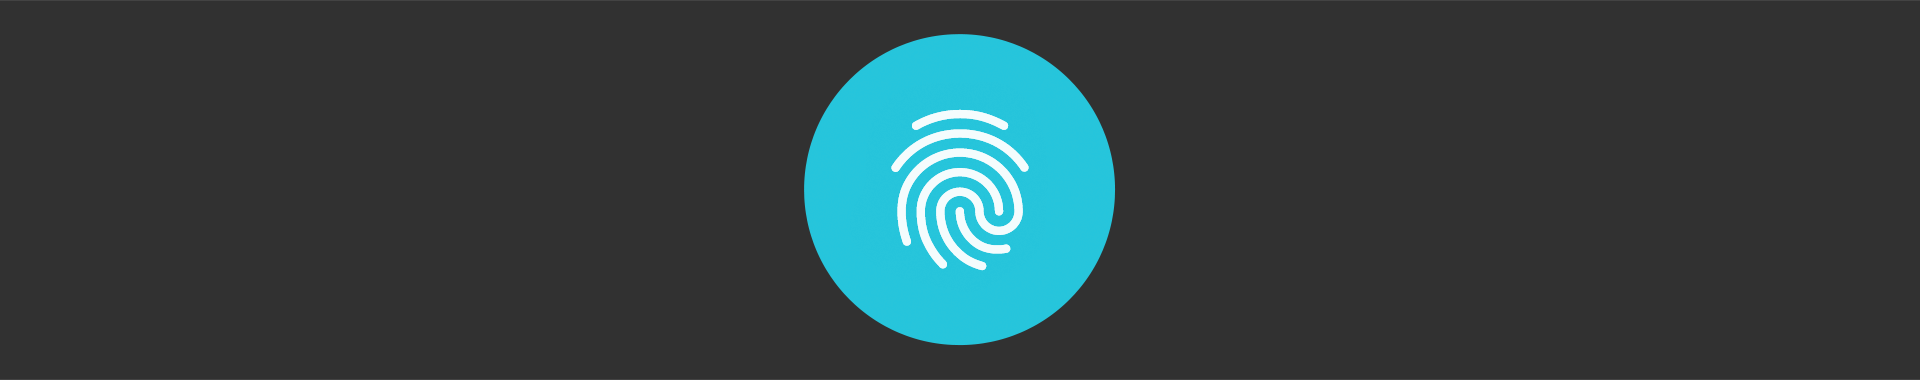 Secure your sensitive data with your Fingerprint on Android